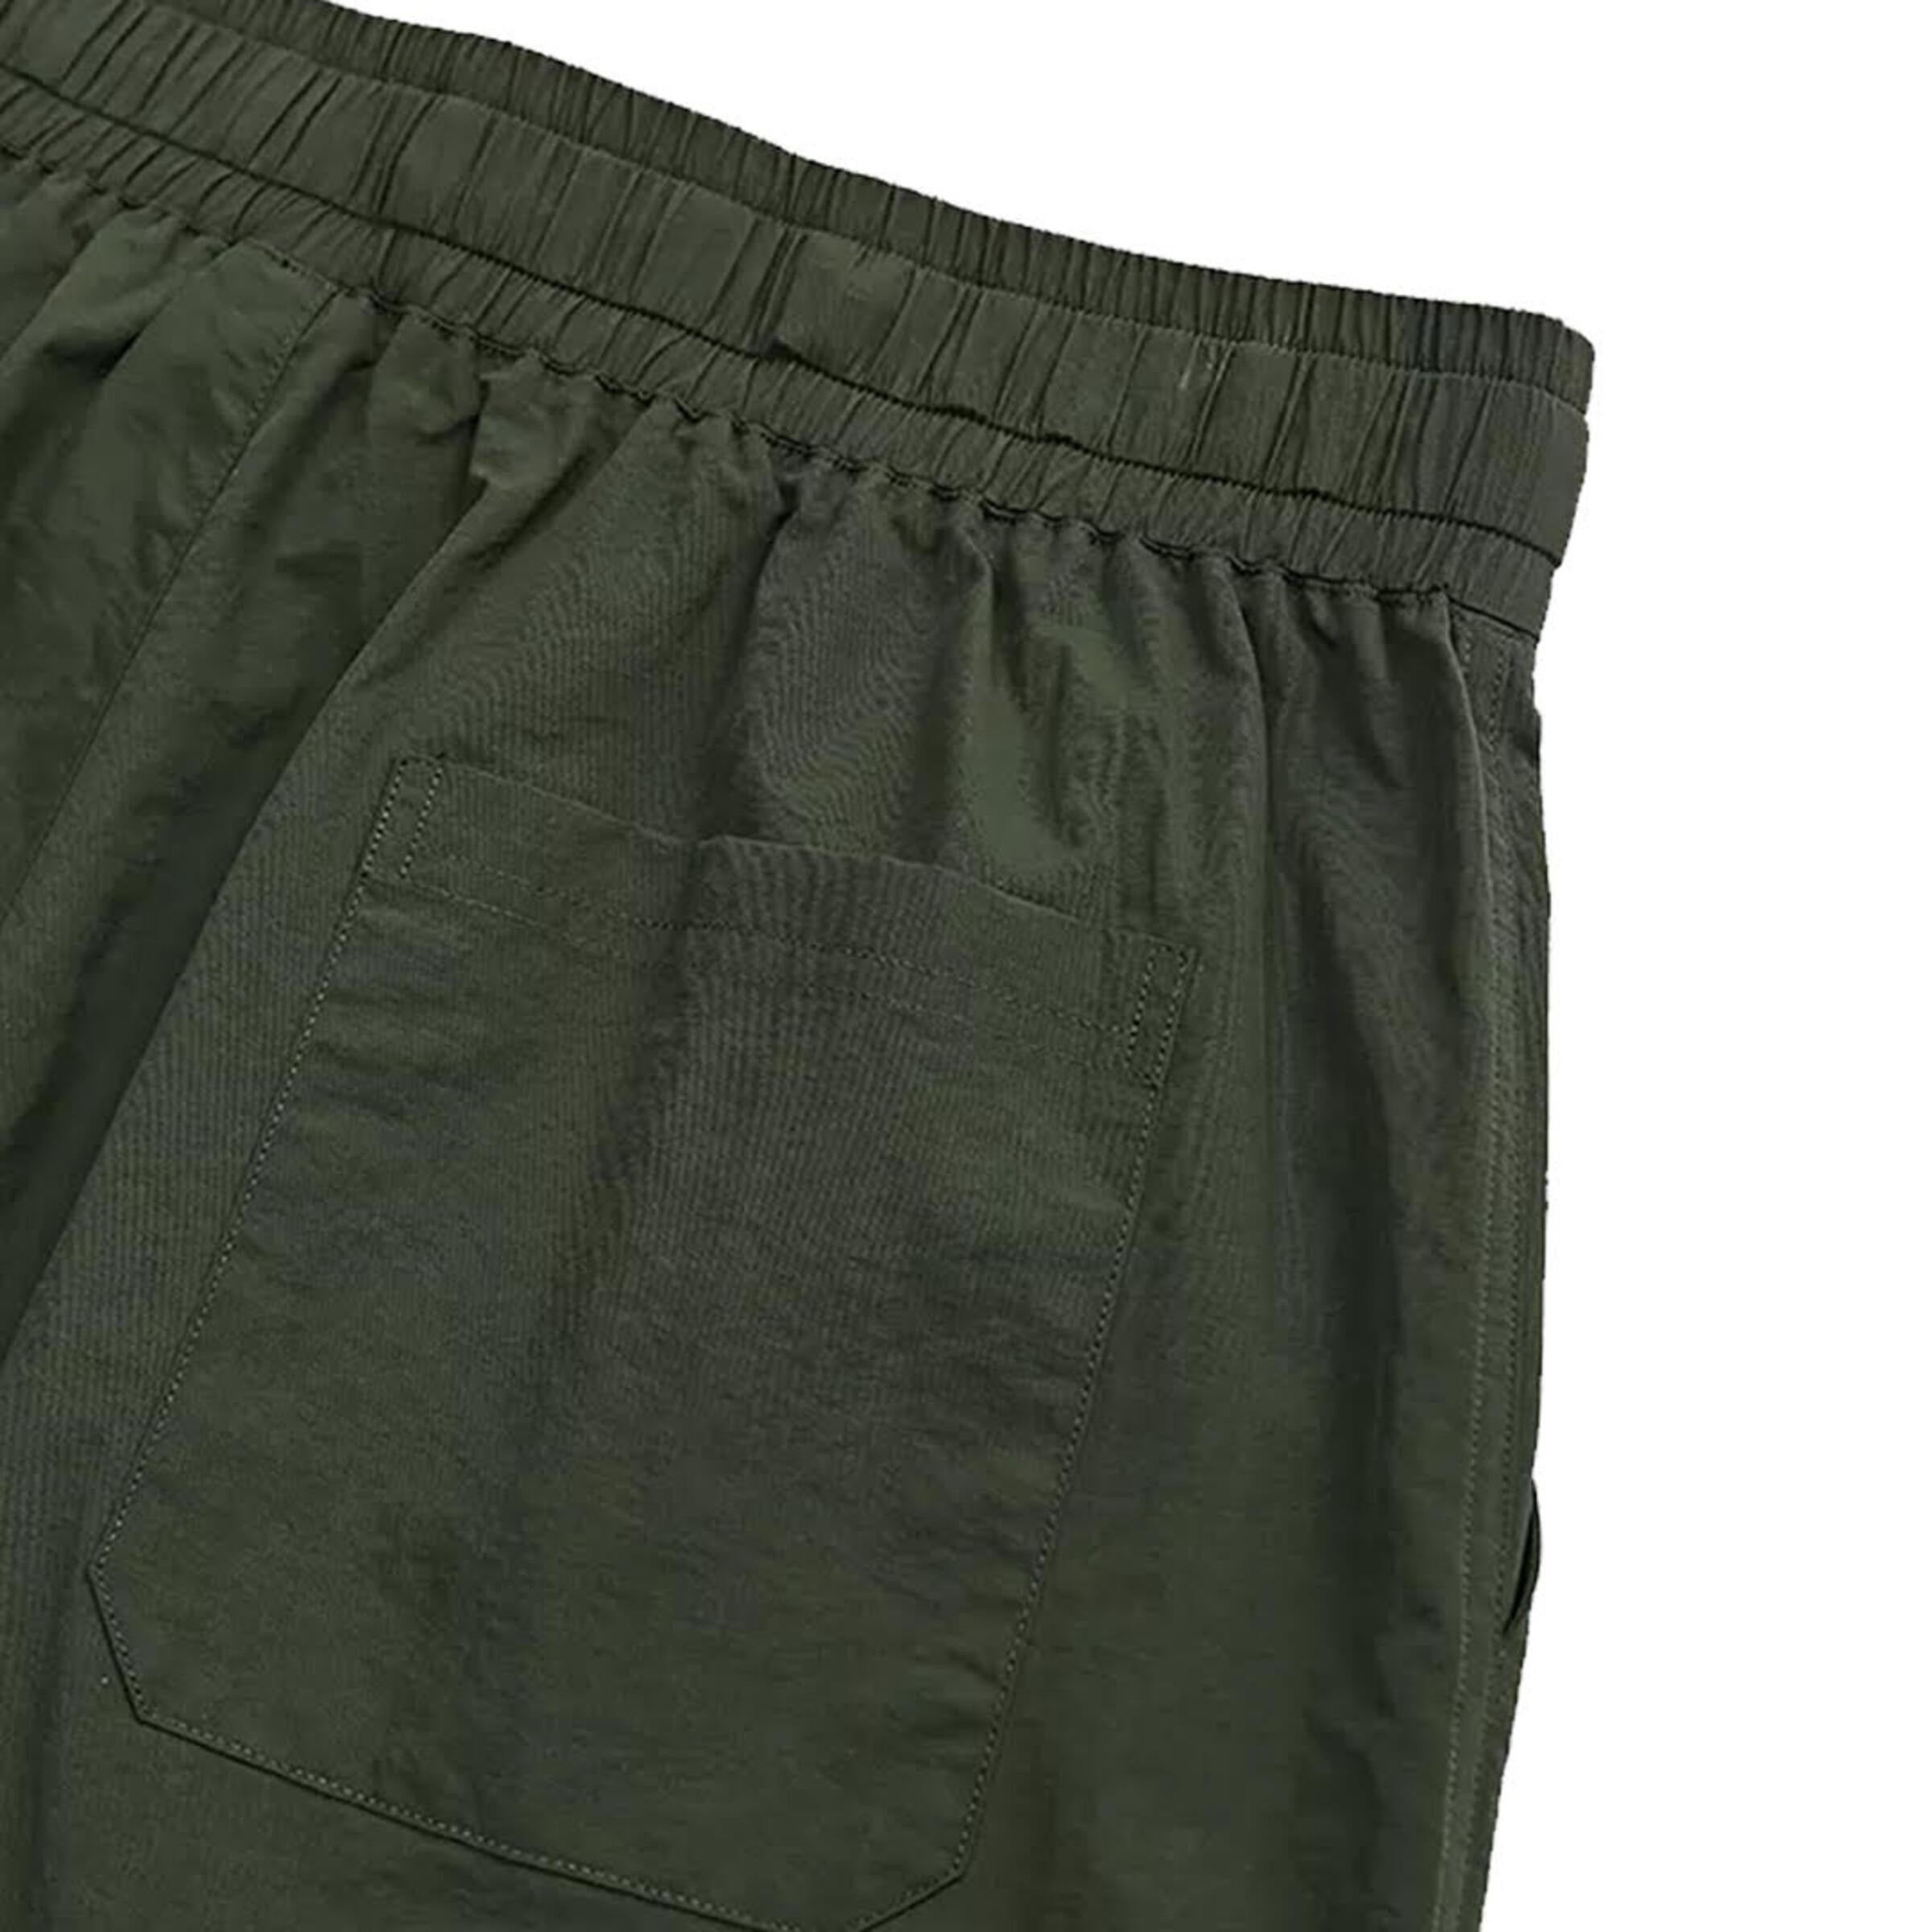 It Means Good Bueno Hiking Shorts - Olive